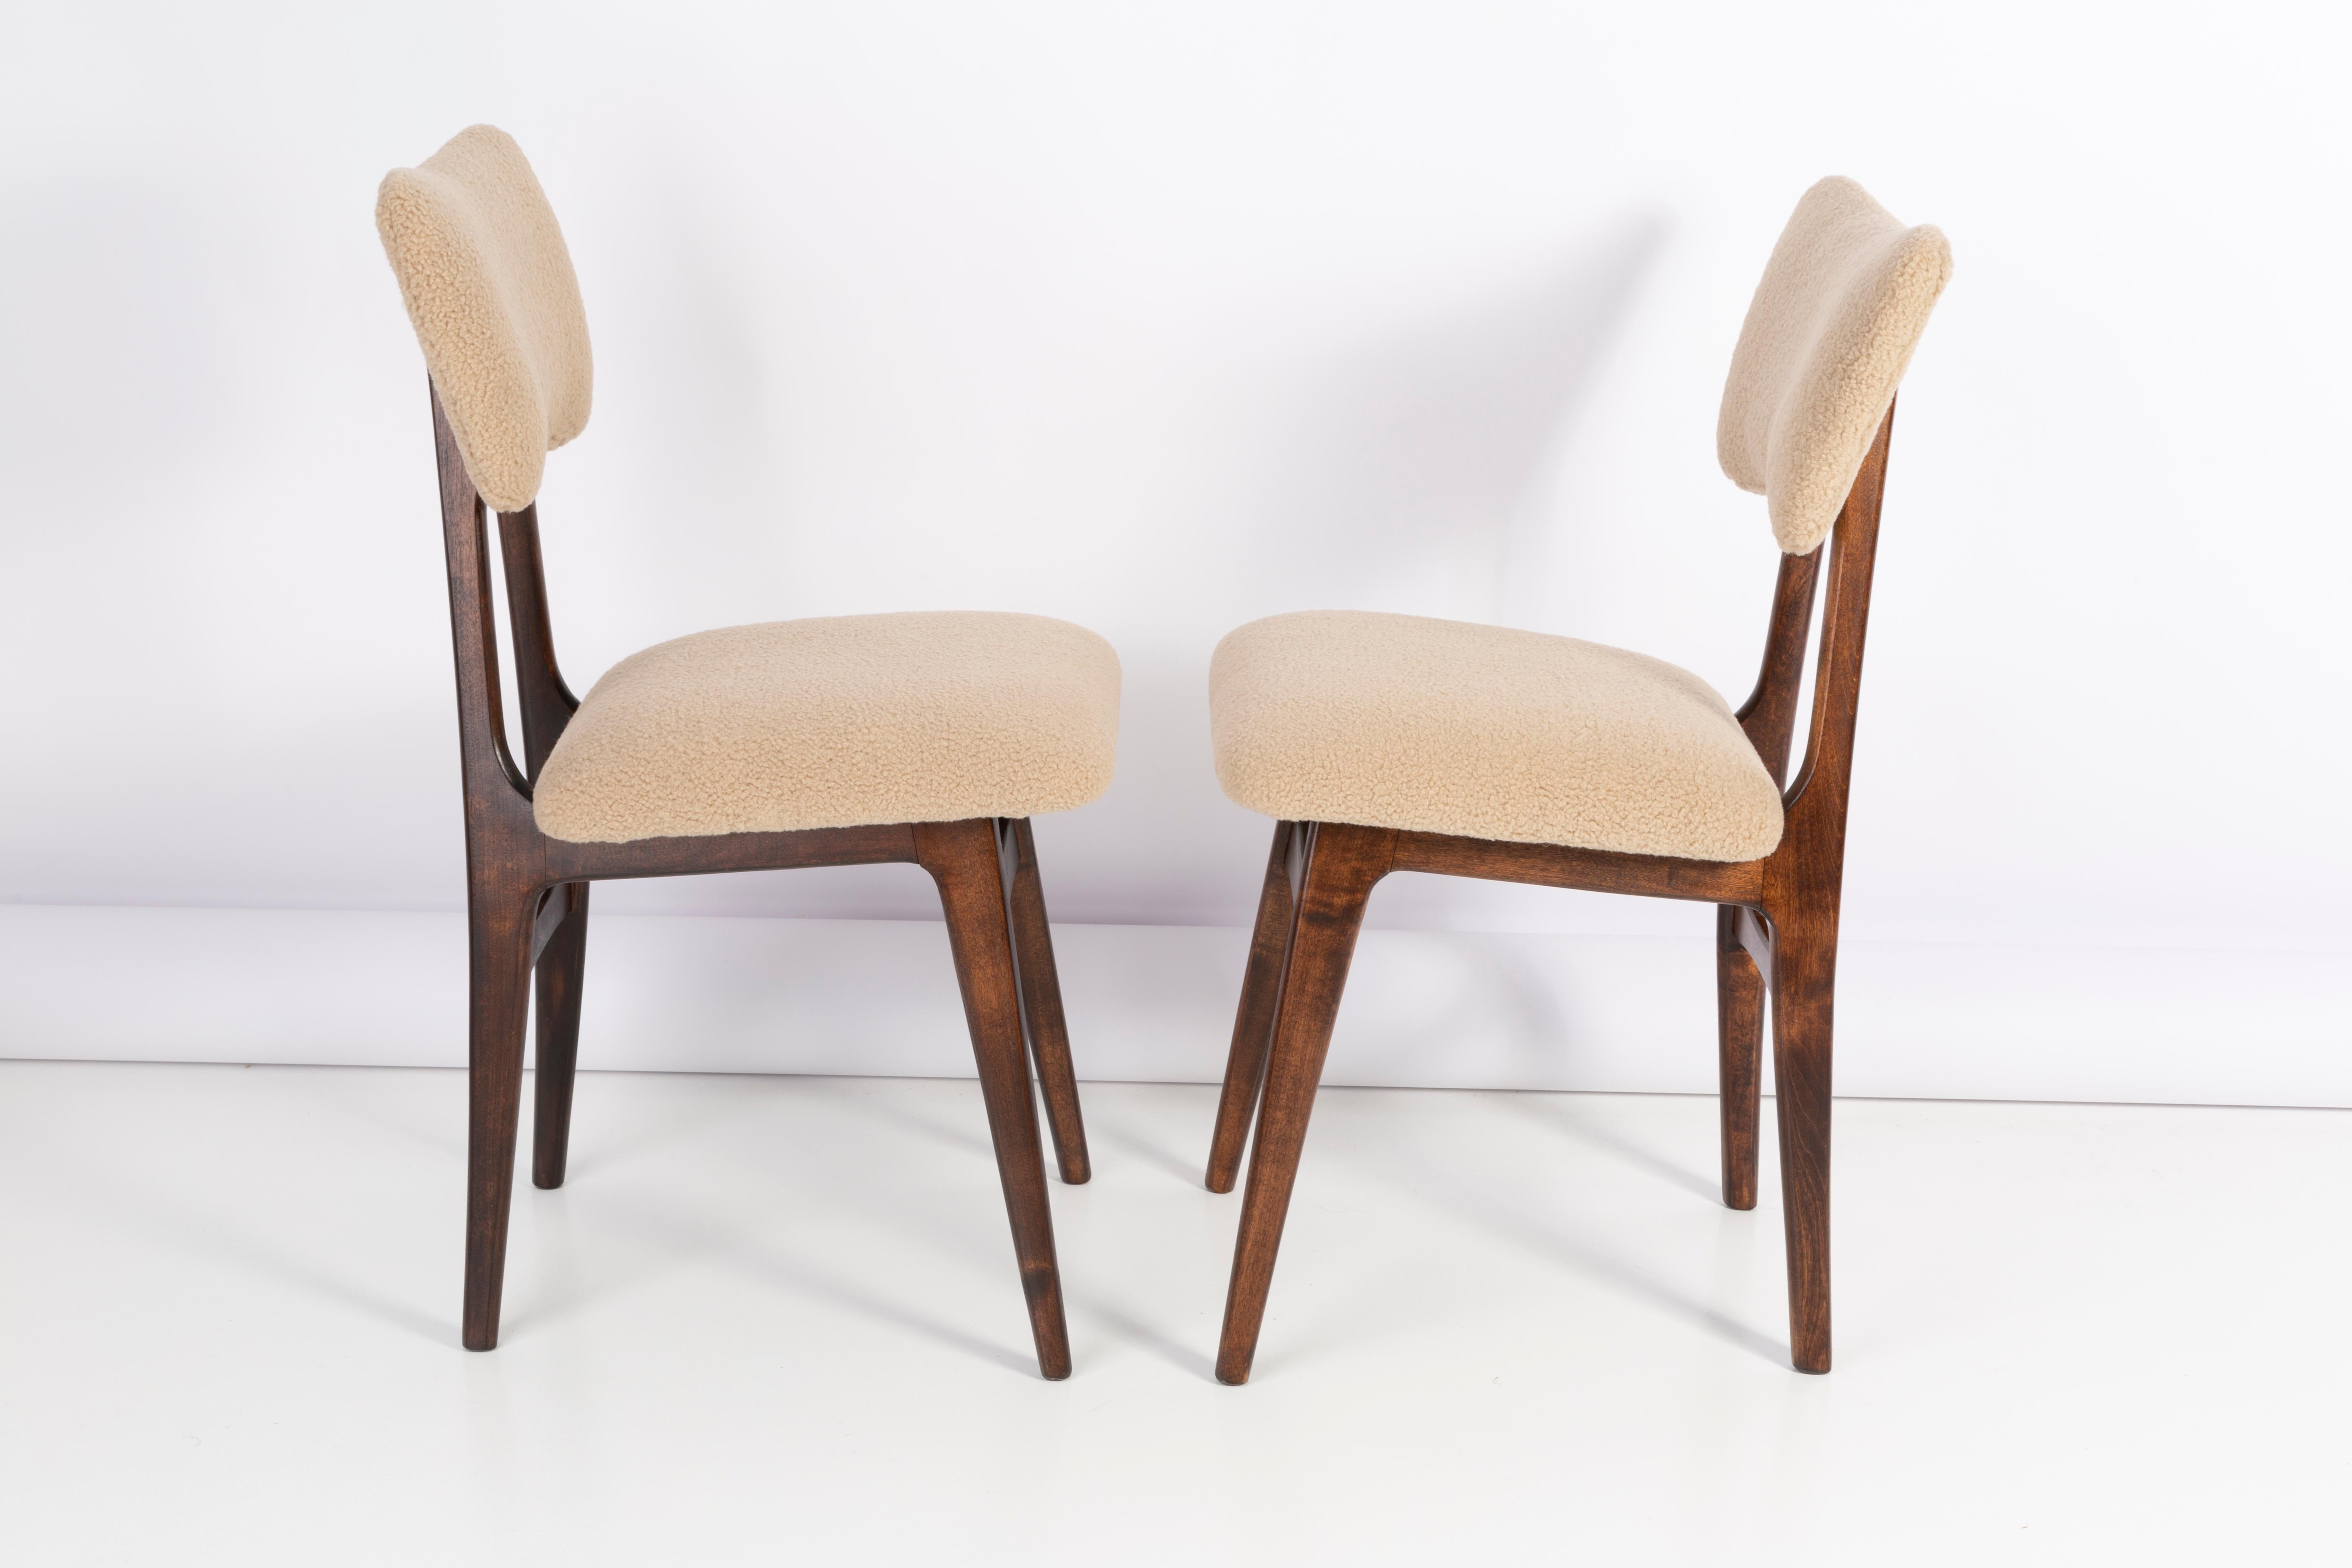 Chairs designed by Prof. Rajmund Halas. Made of beechwood. Chairs are after a complete upholstery renovation; the woodwork has been refreshed. Seat and back is dressed in camel, durable and pleasant to the touch bouclé fabric. Chairs are stabile and